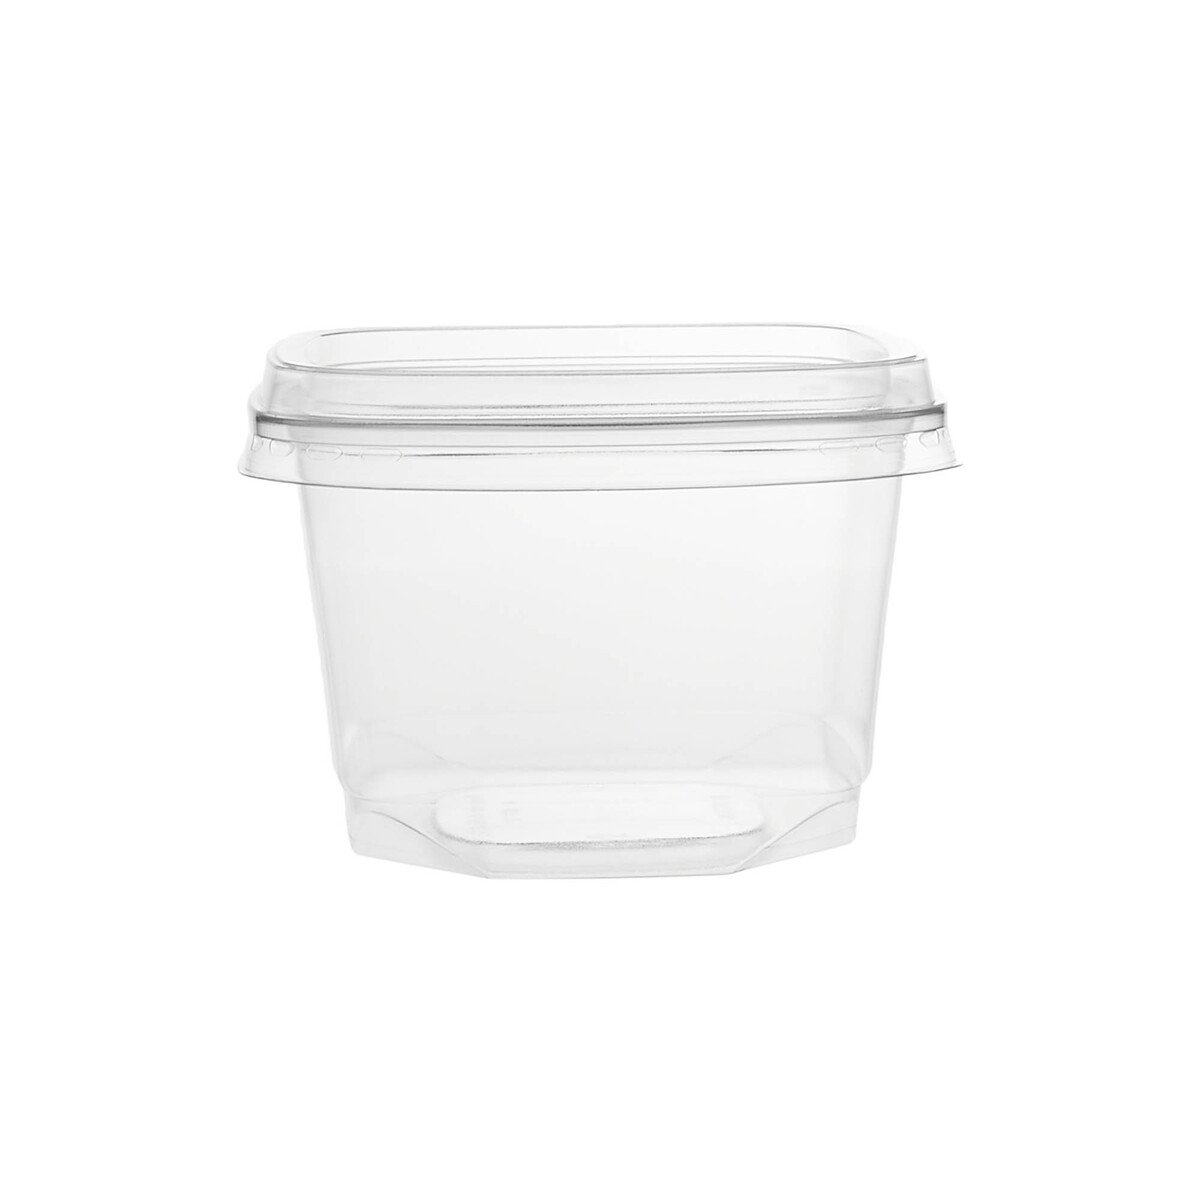 Hotpack PET Clear Deli Container Square With Lid Capacity 16oz 10pcs